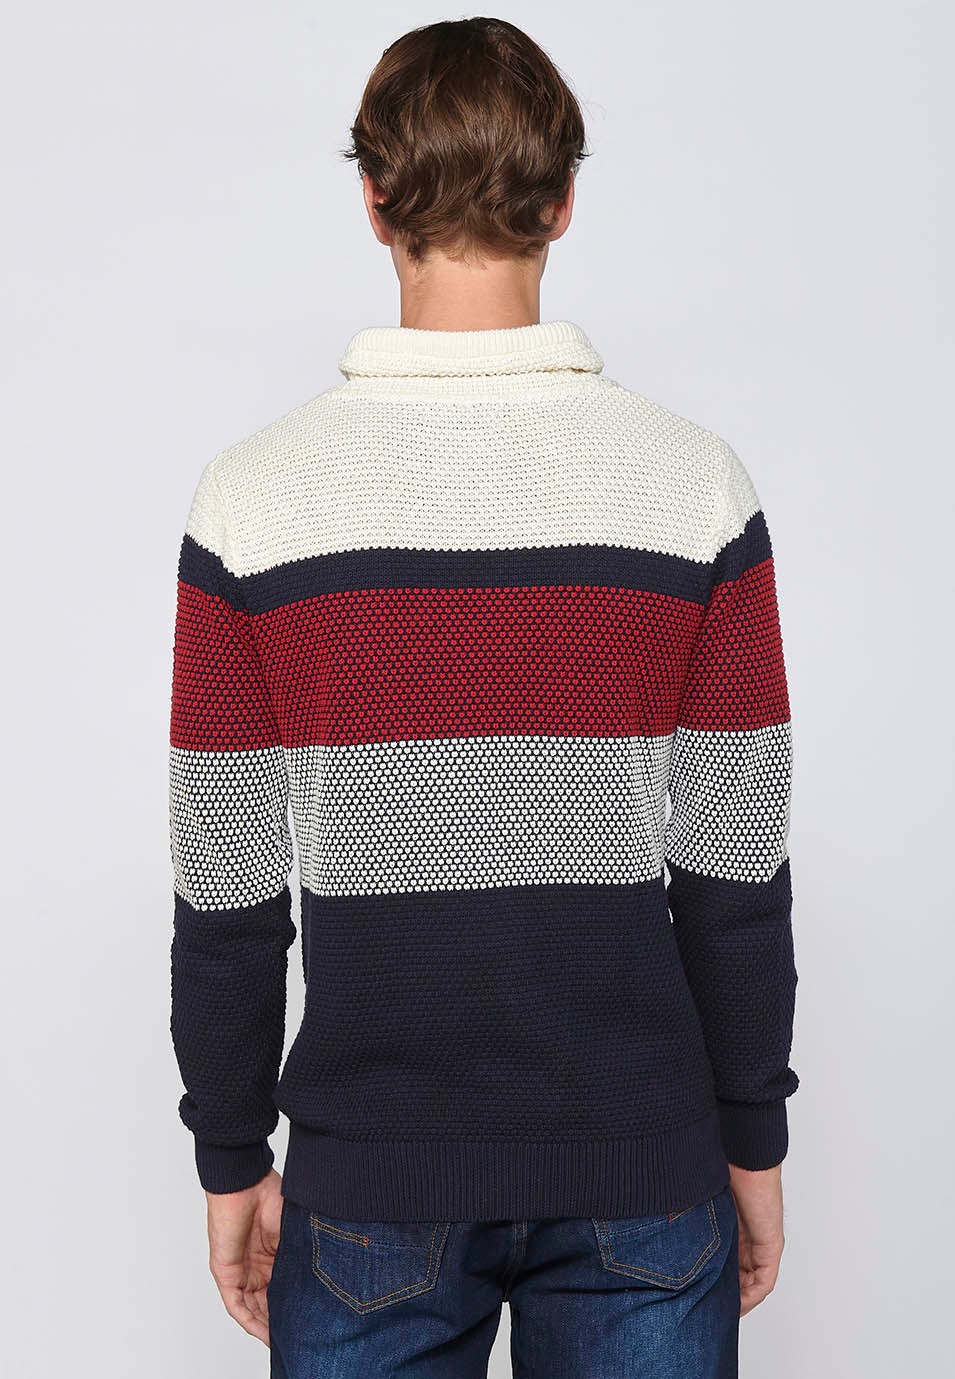 Long-sleeved sweater with adjustable turtleneck with drawstring, navy cotton textured striped tricot for men 6